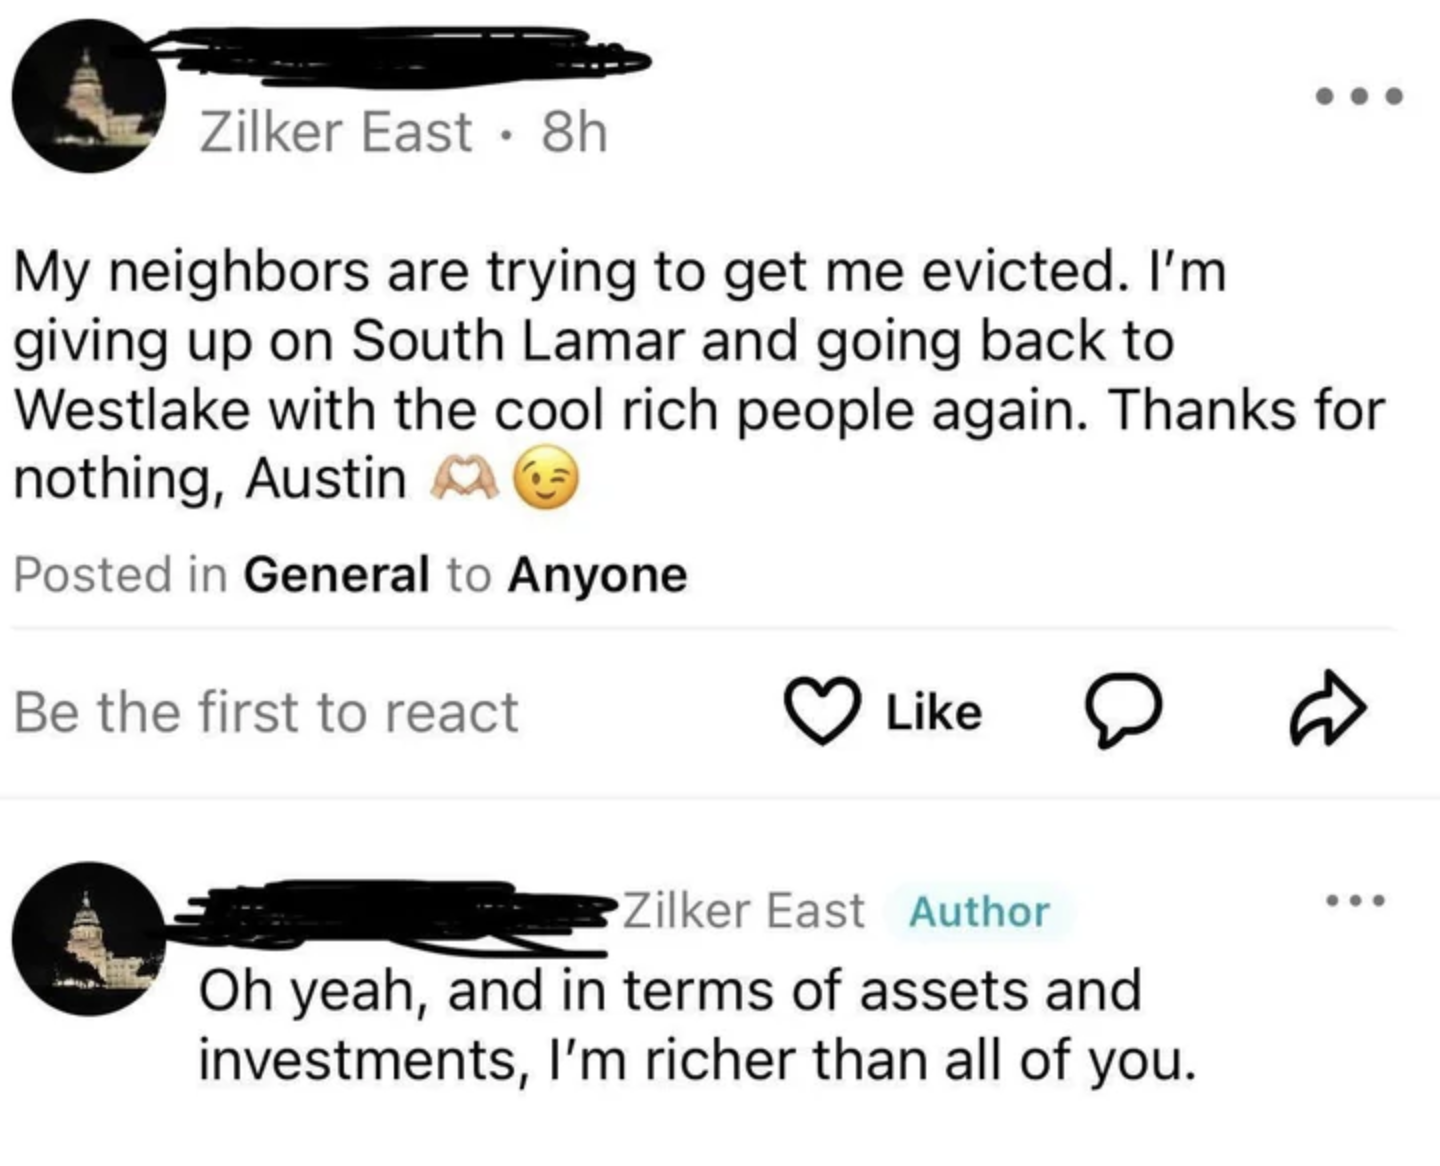 &quot;My neighbors are trying to get me evicted; I&#x27;m giving up on South Lamar and going back to Westlake with the cool rich people again; thanks for nothing, Austin,&quot; and adds: &quot;Oh yeah, and in terms of assets and investments, I&#x27;m richer than all of you&quot;